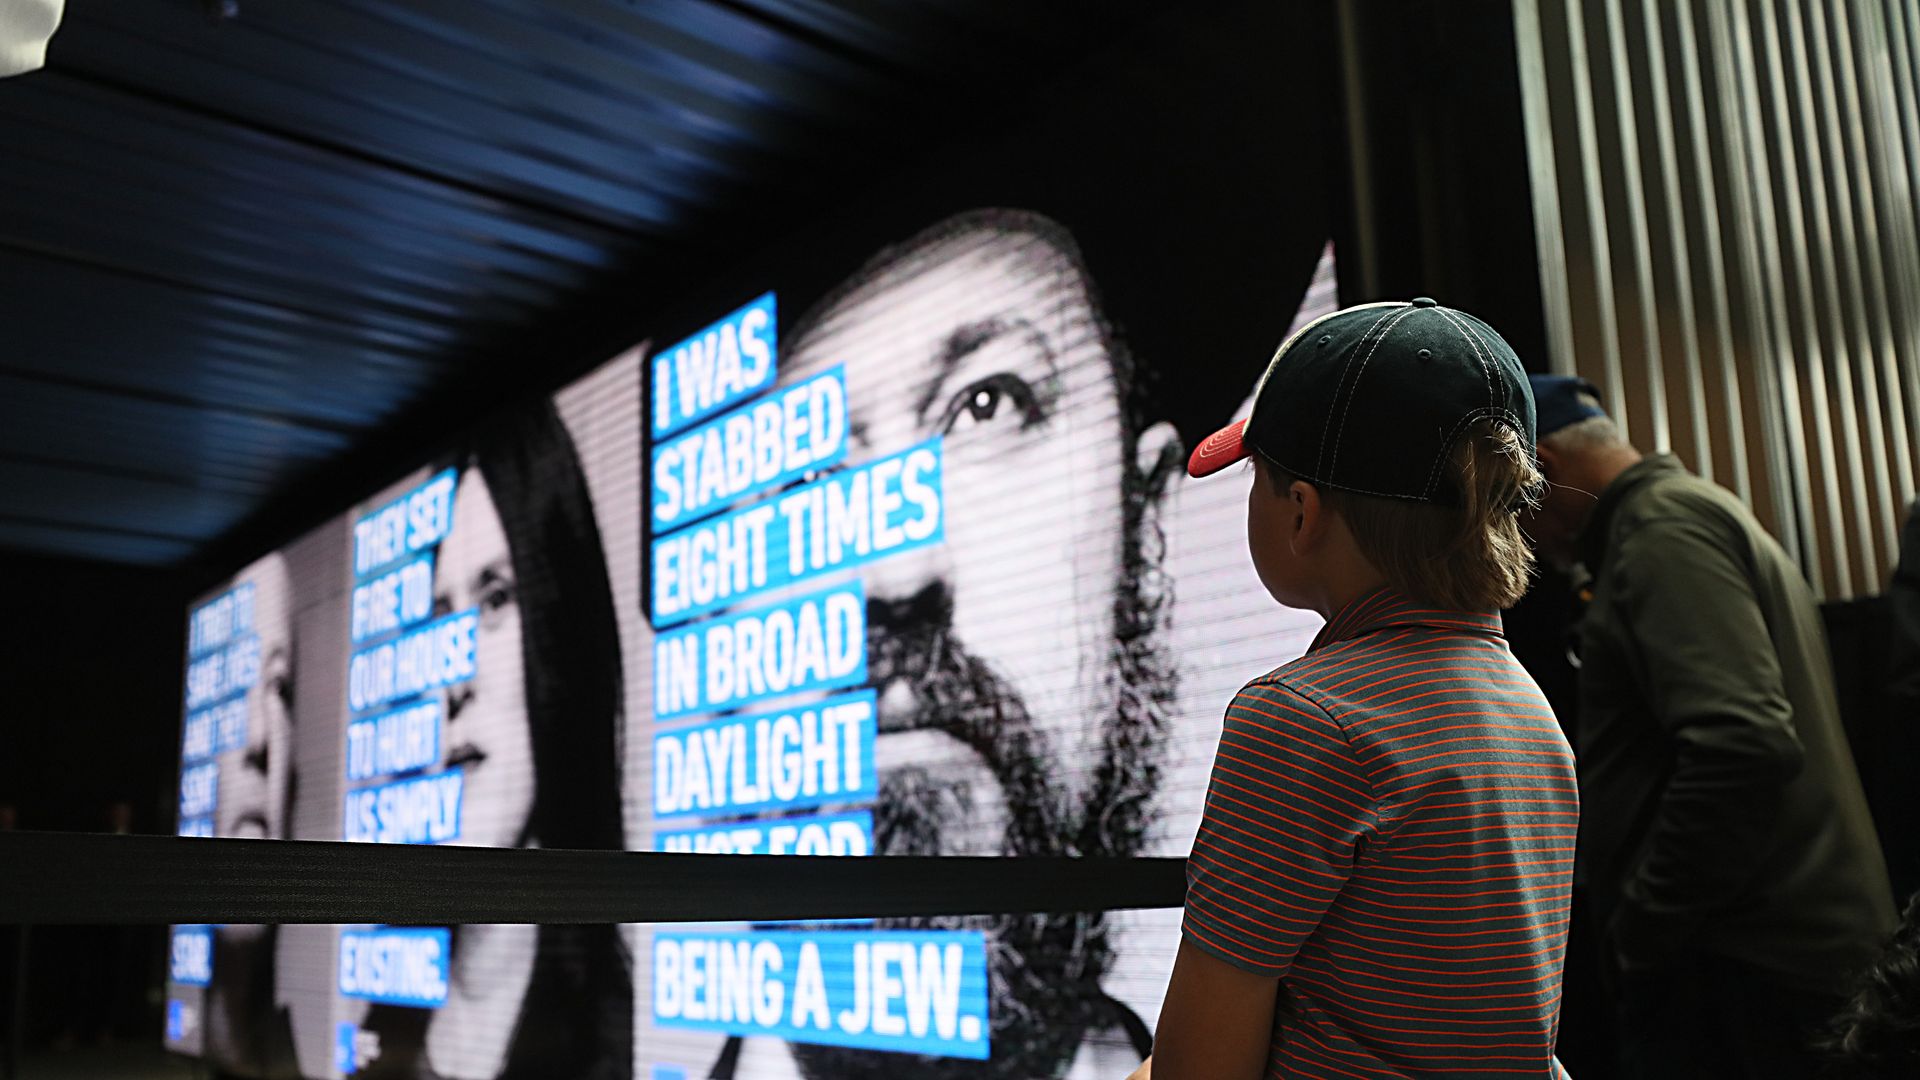 A child watches the press conference at Boston's North Station for the Face Jewish Hate campaign.